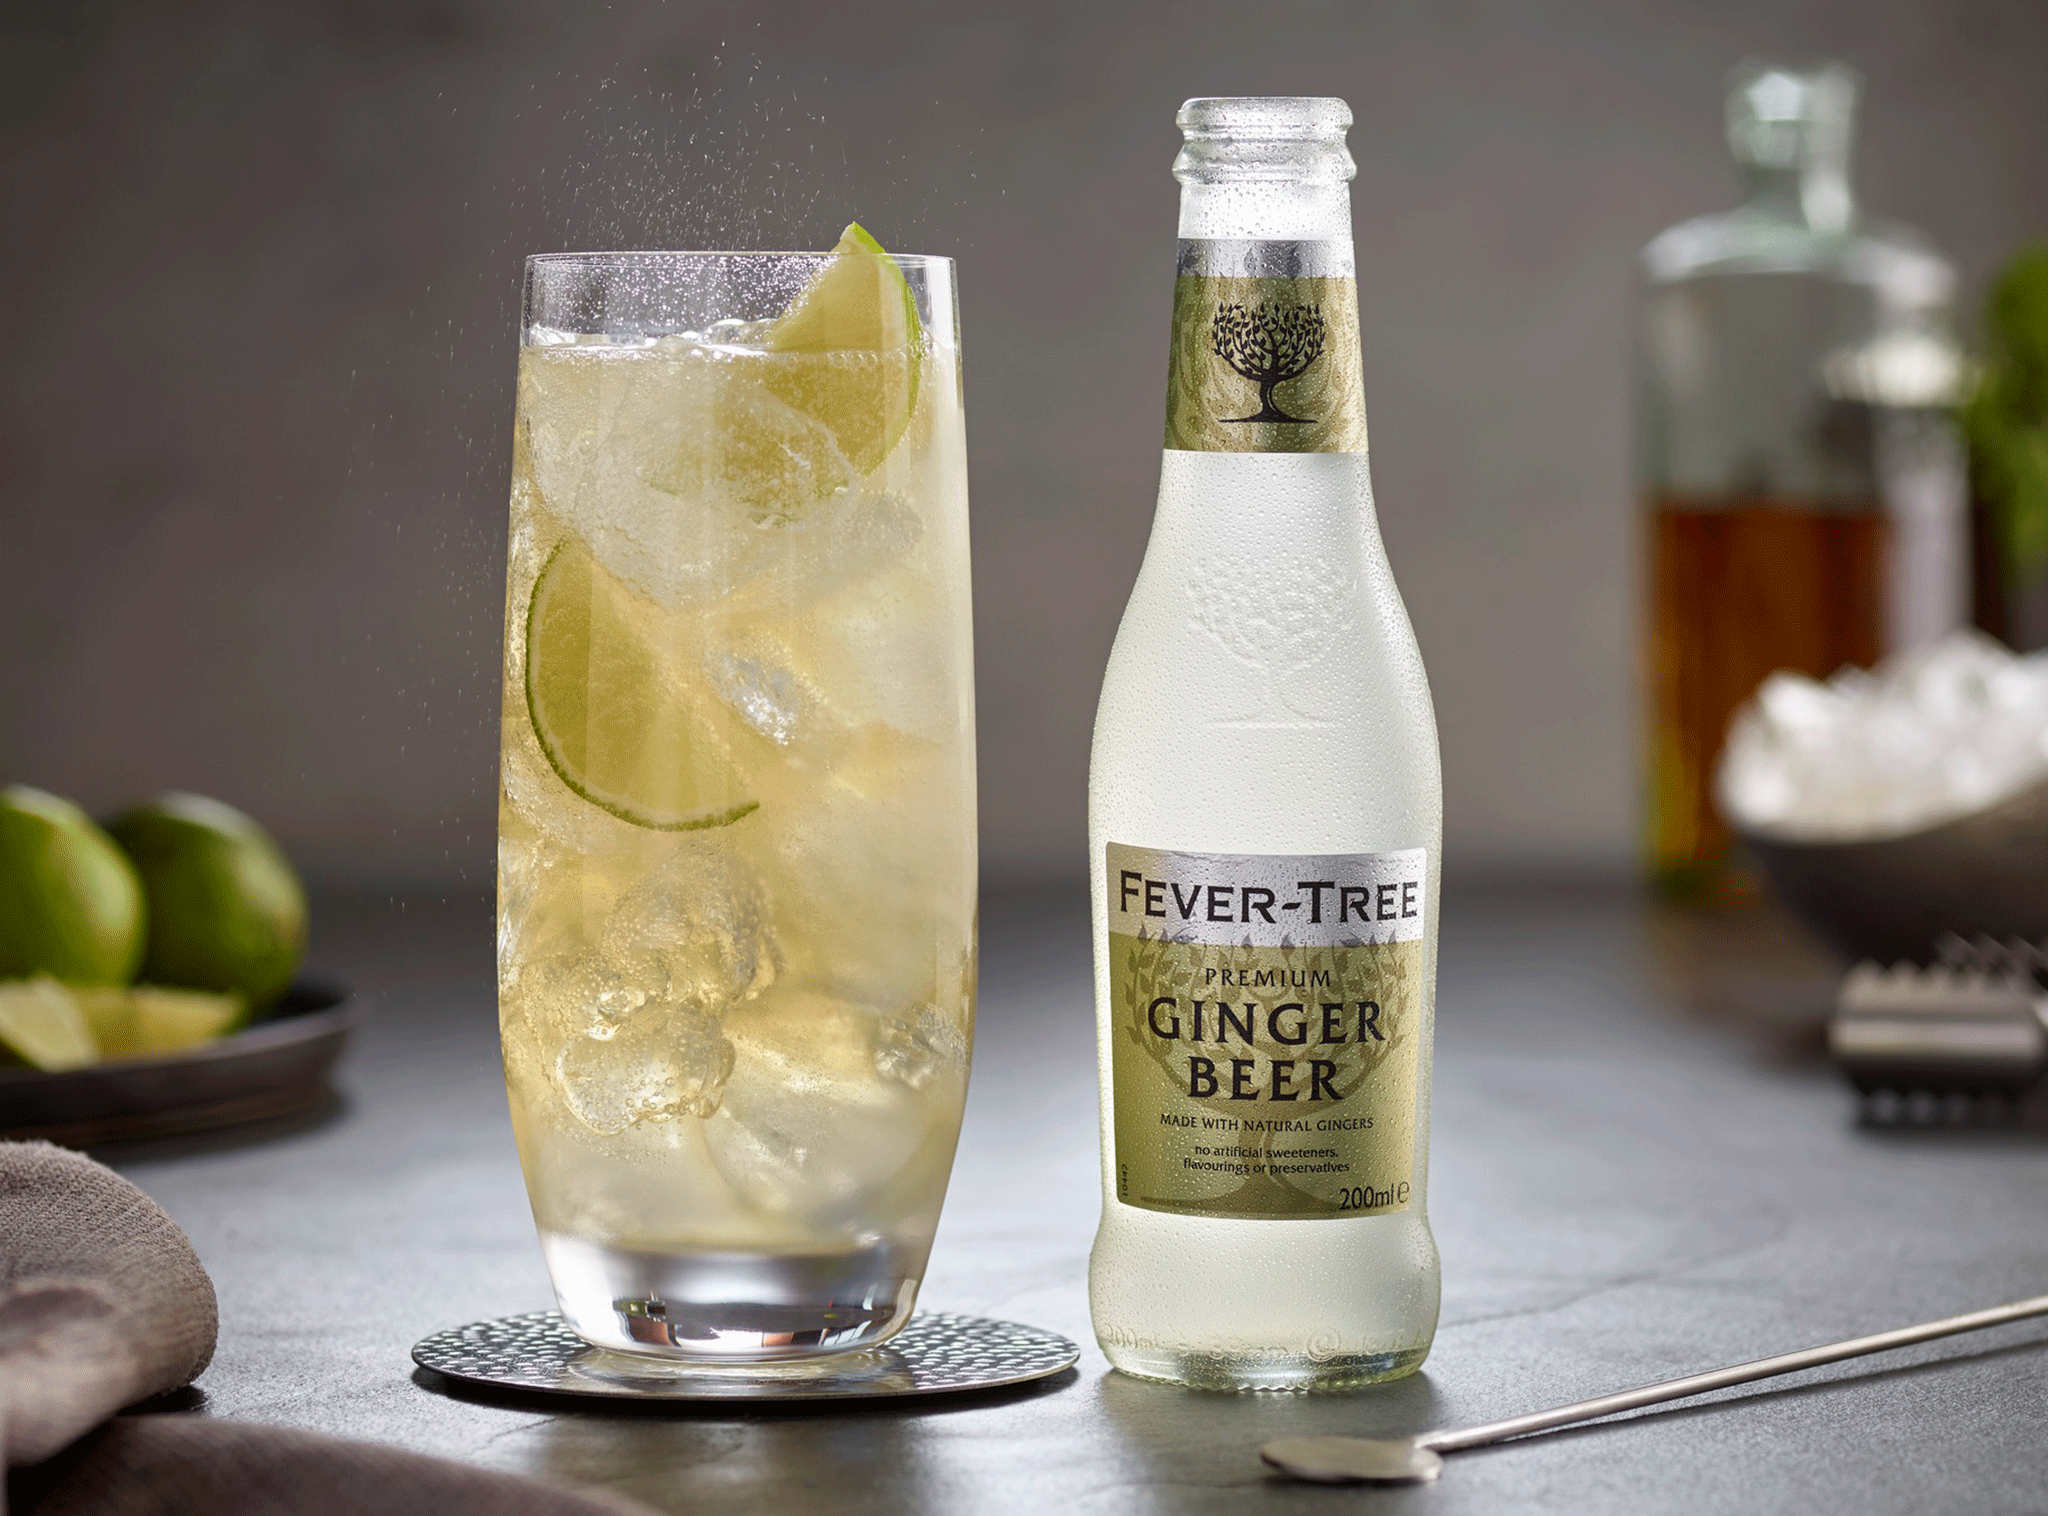 The London-based company specialises in mixers from premium tonic water to Sicilian lemonade, often mixed with high-end spirits